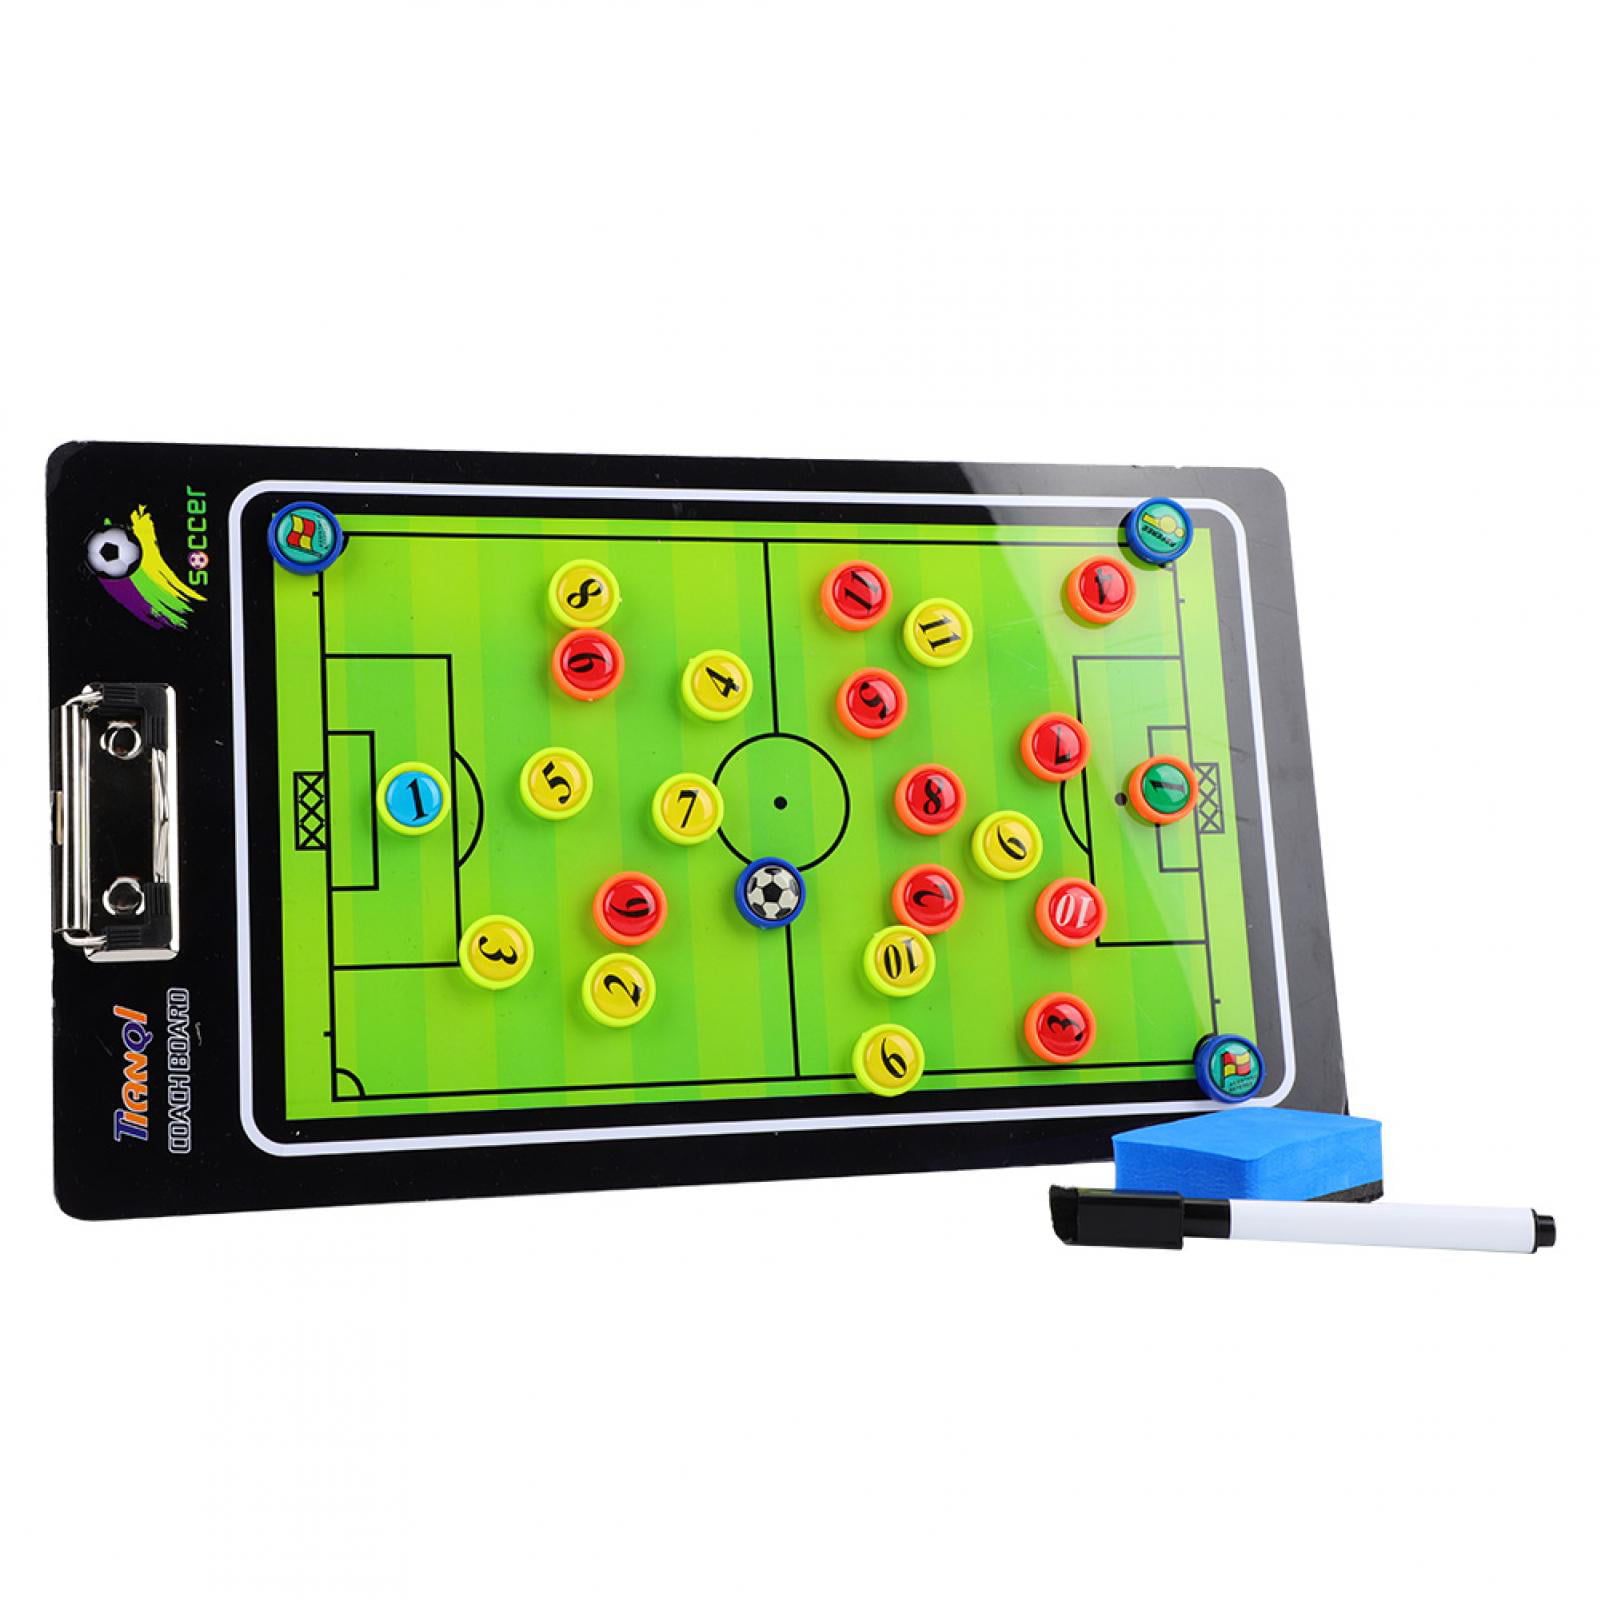 Details about   Football Tactics Coaching Board Soccer Strategy Training Clipboard Reliable 